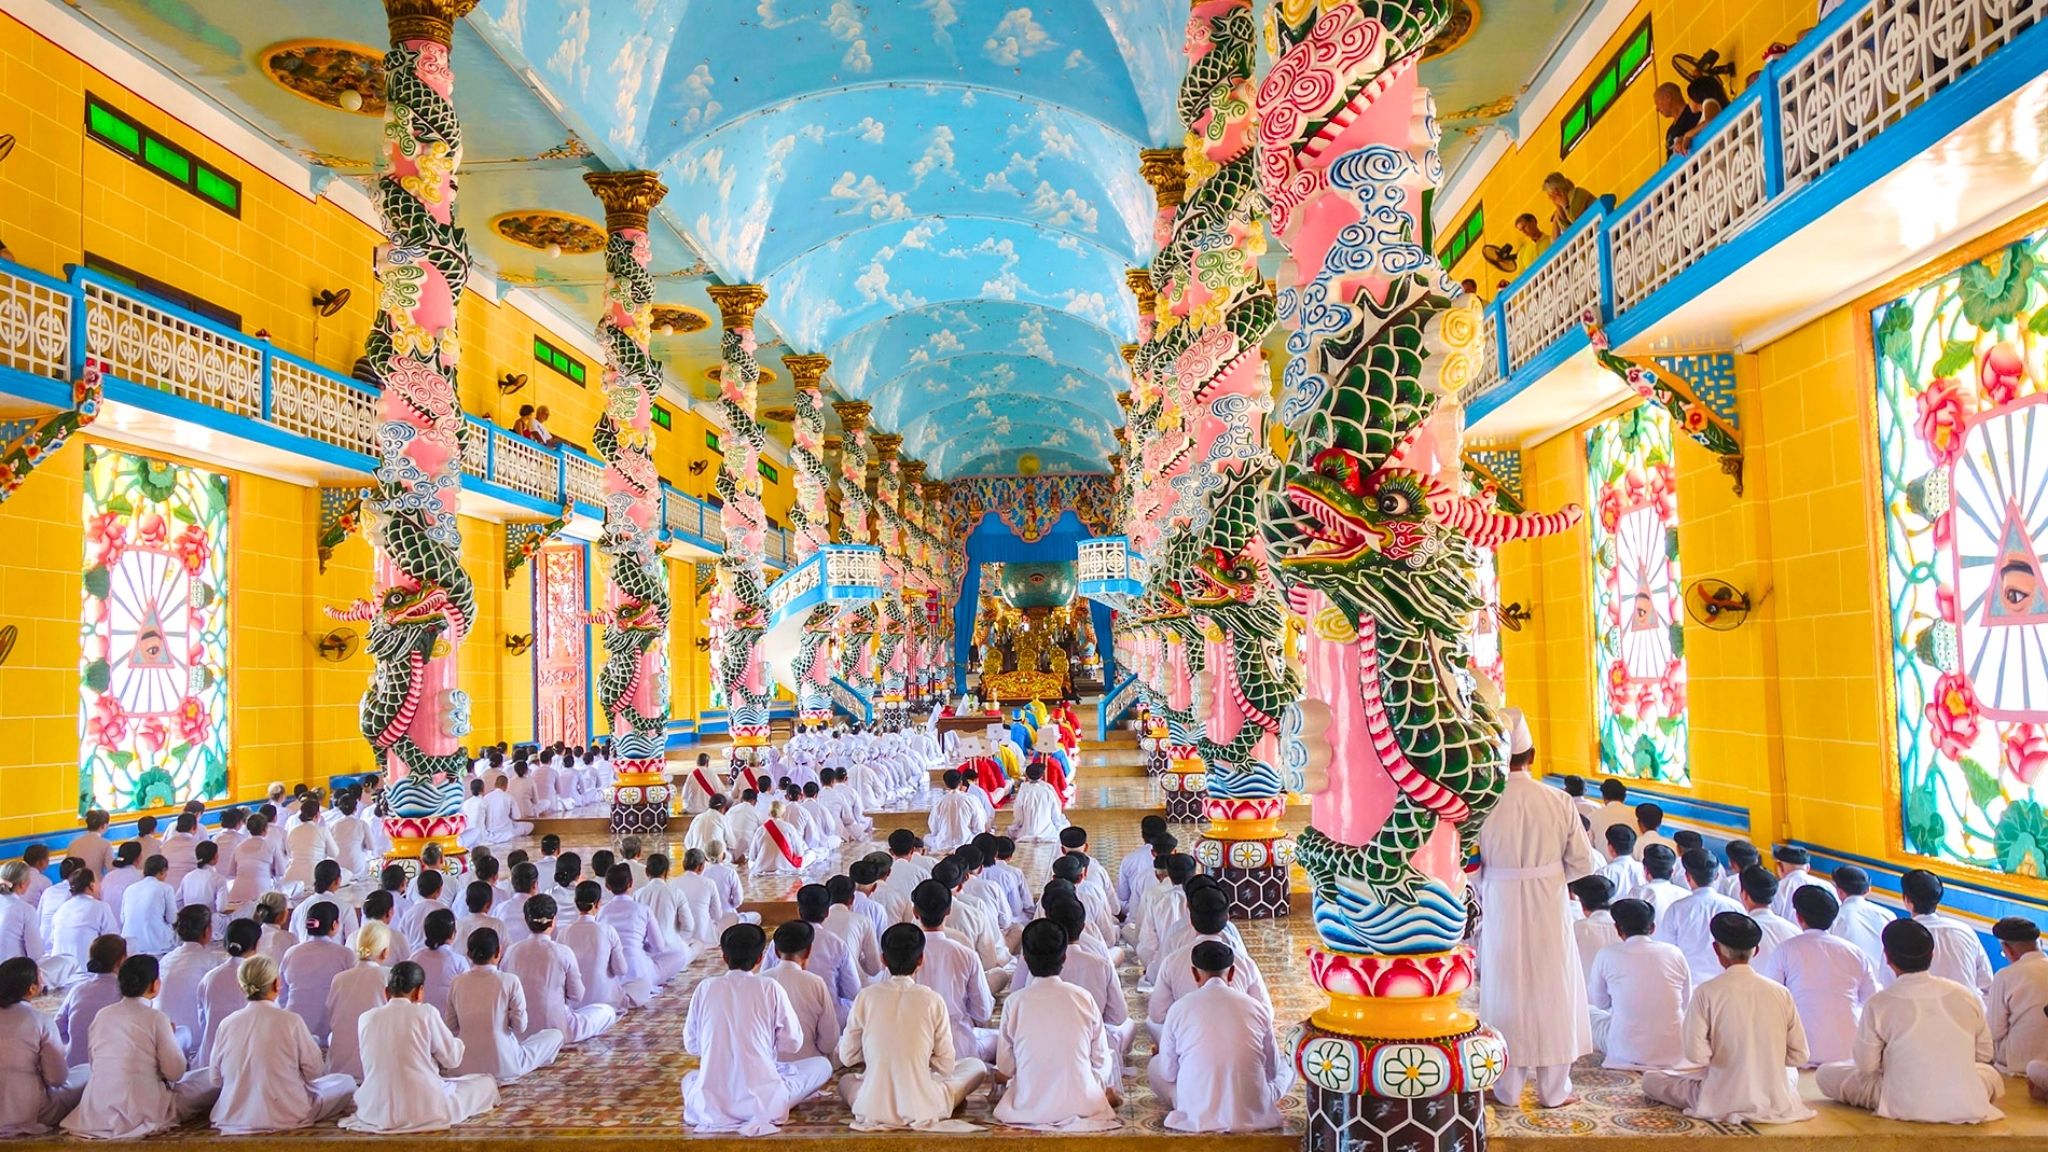 Attend A Ceremony At The Cao Dai Temple